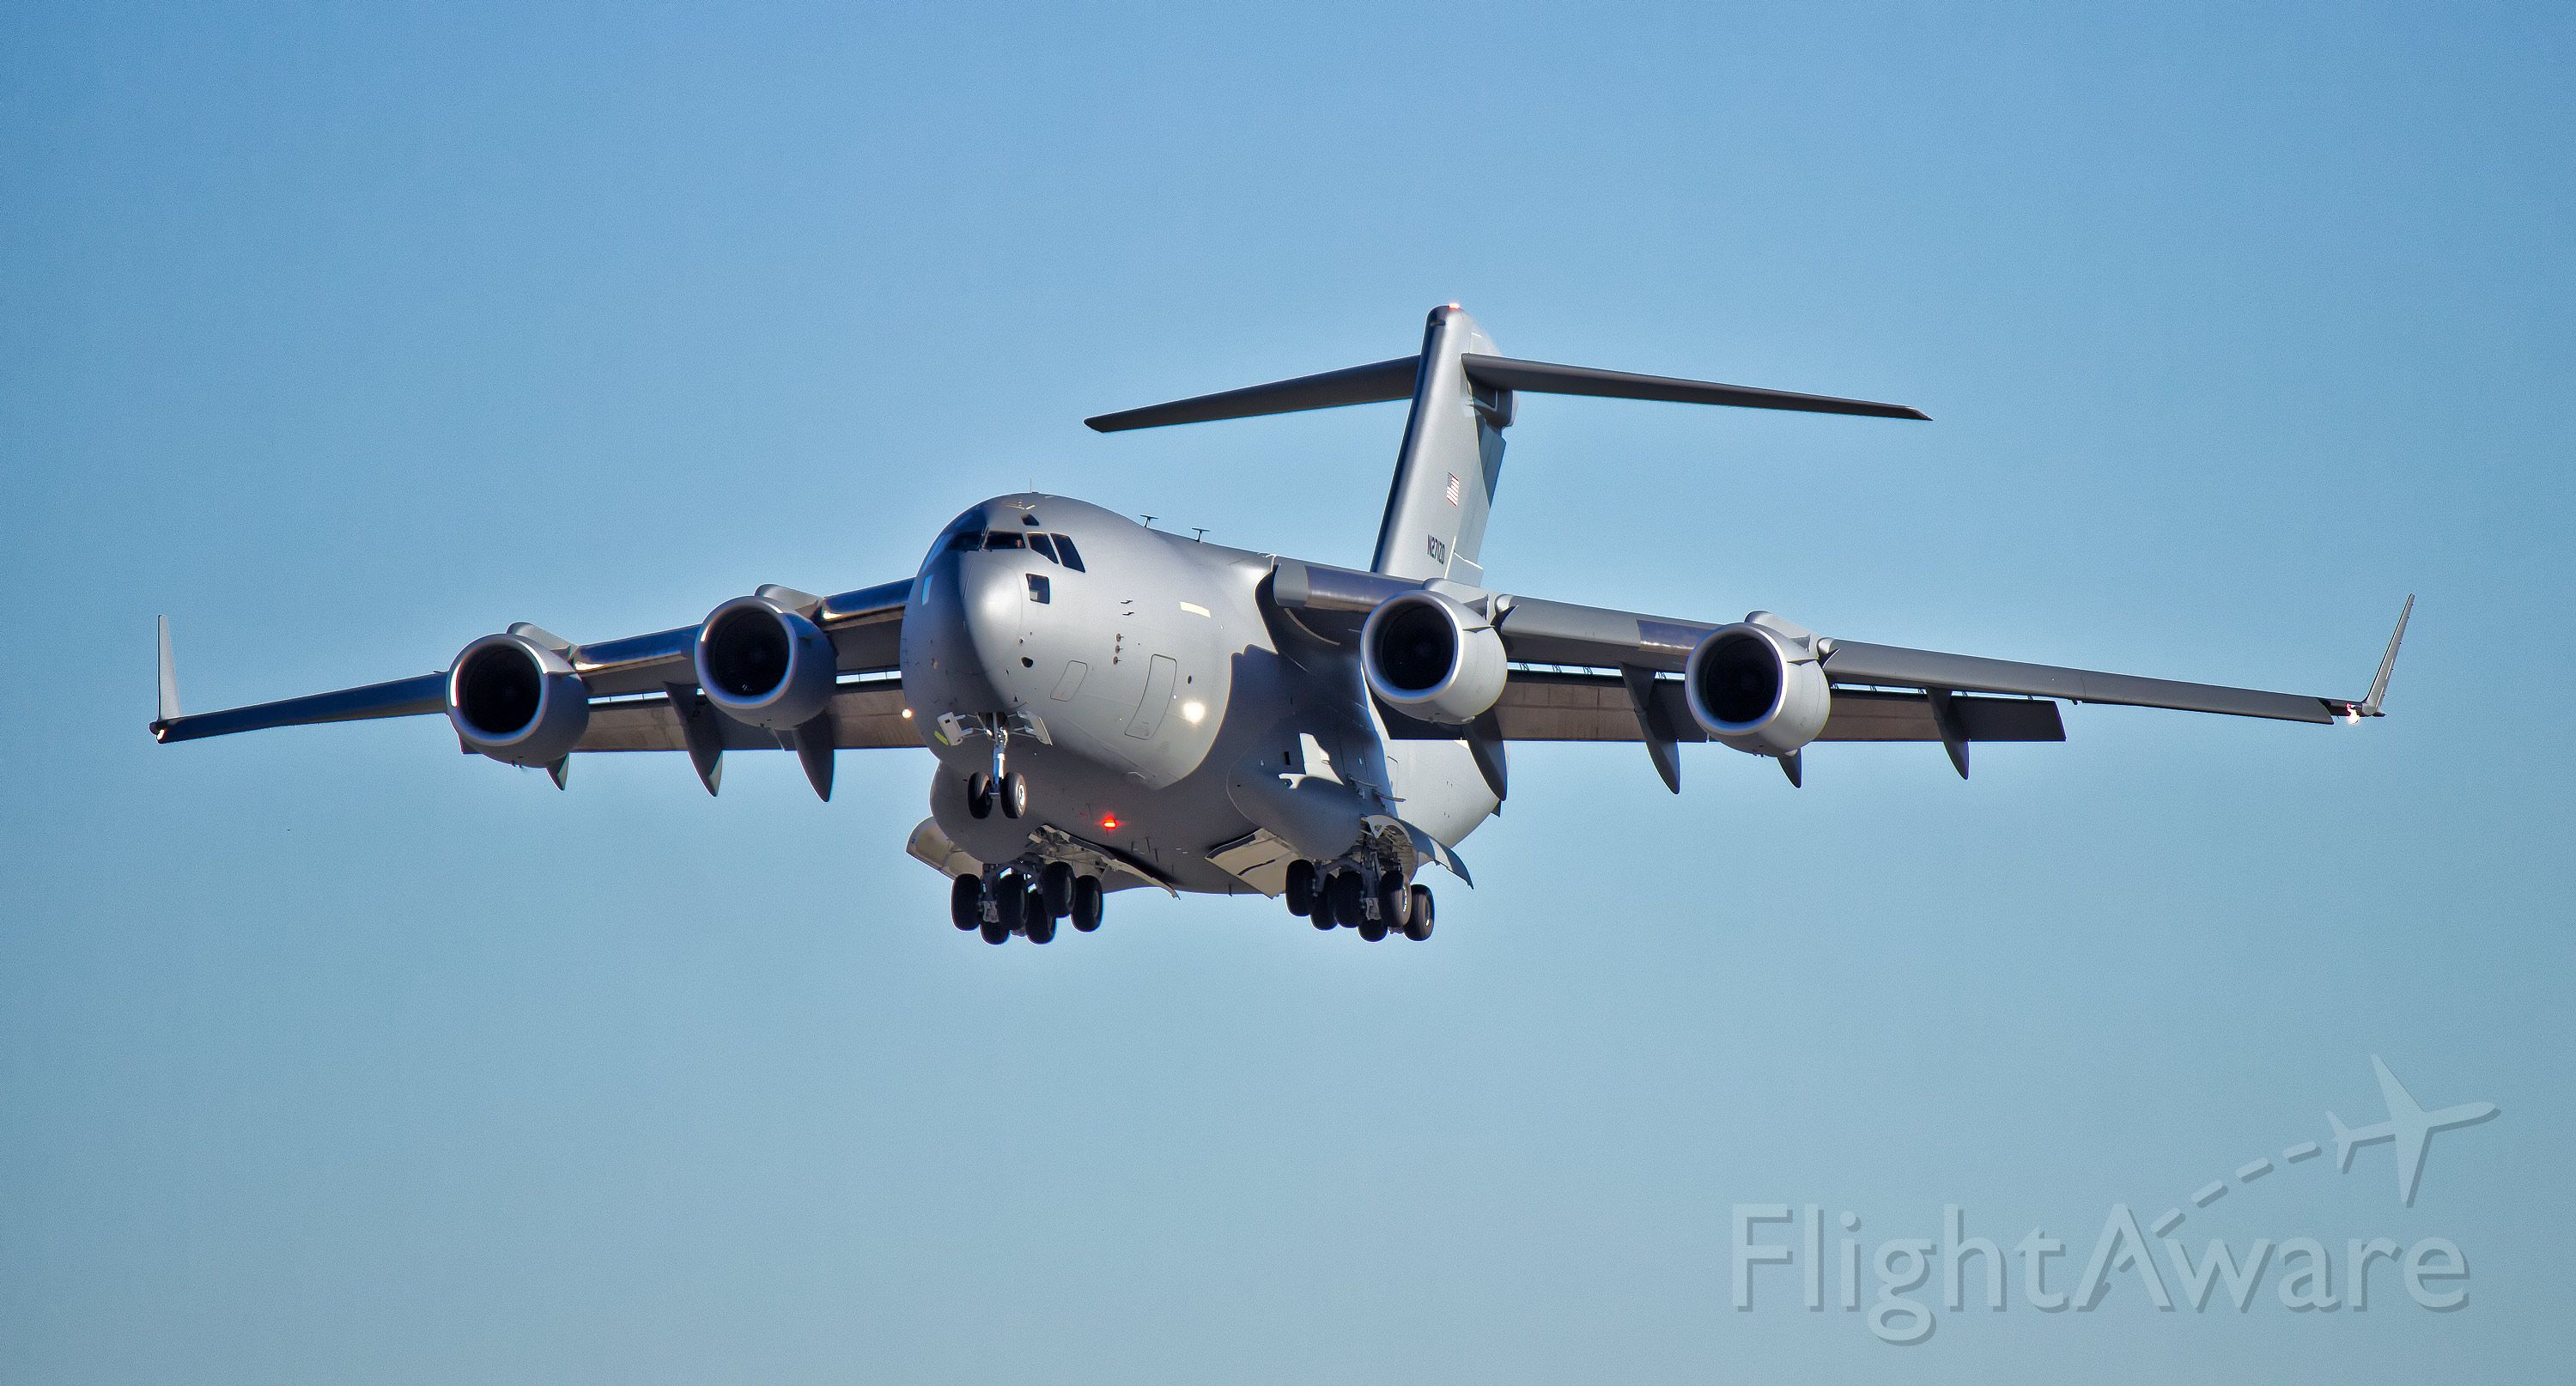 Boeing Globemaster III (N271ZD) - A "white tail" Boeing C-17 Globemaster III (N271ZD) on approach after its maiden test flight from the Boeing Factory in Long Beach, CA at KLGB